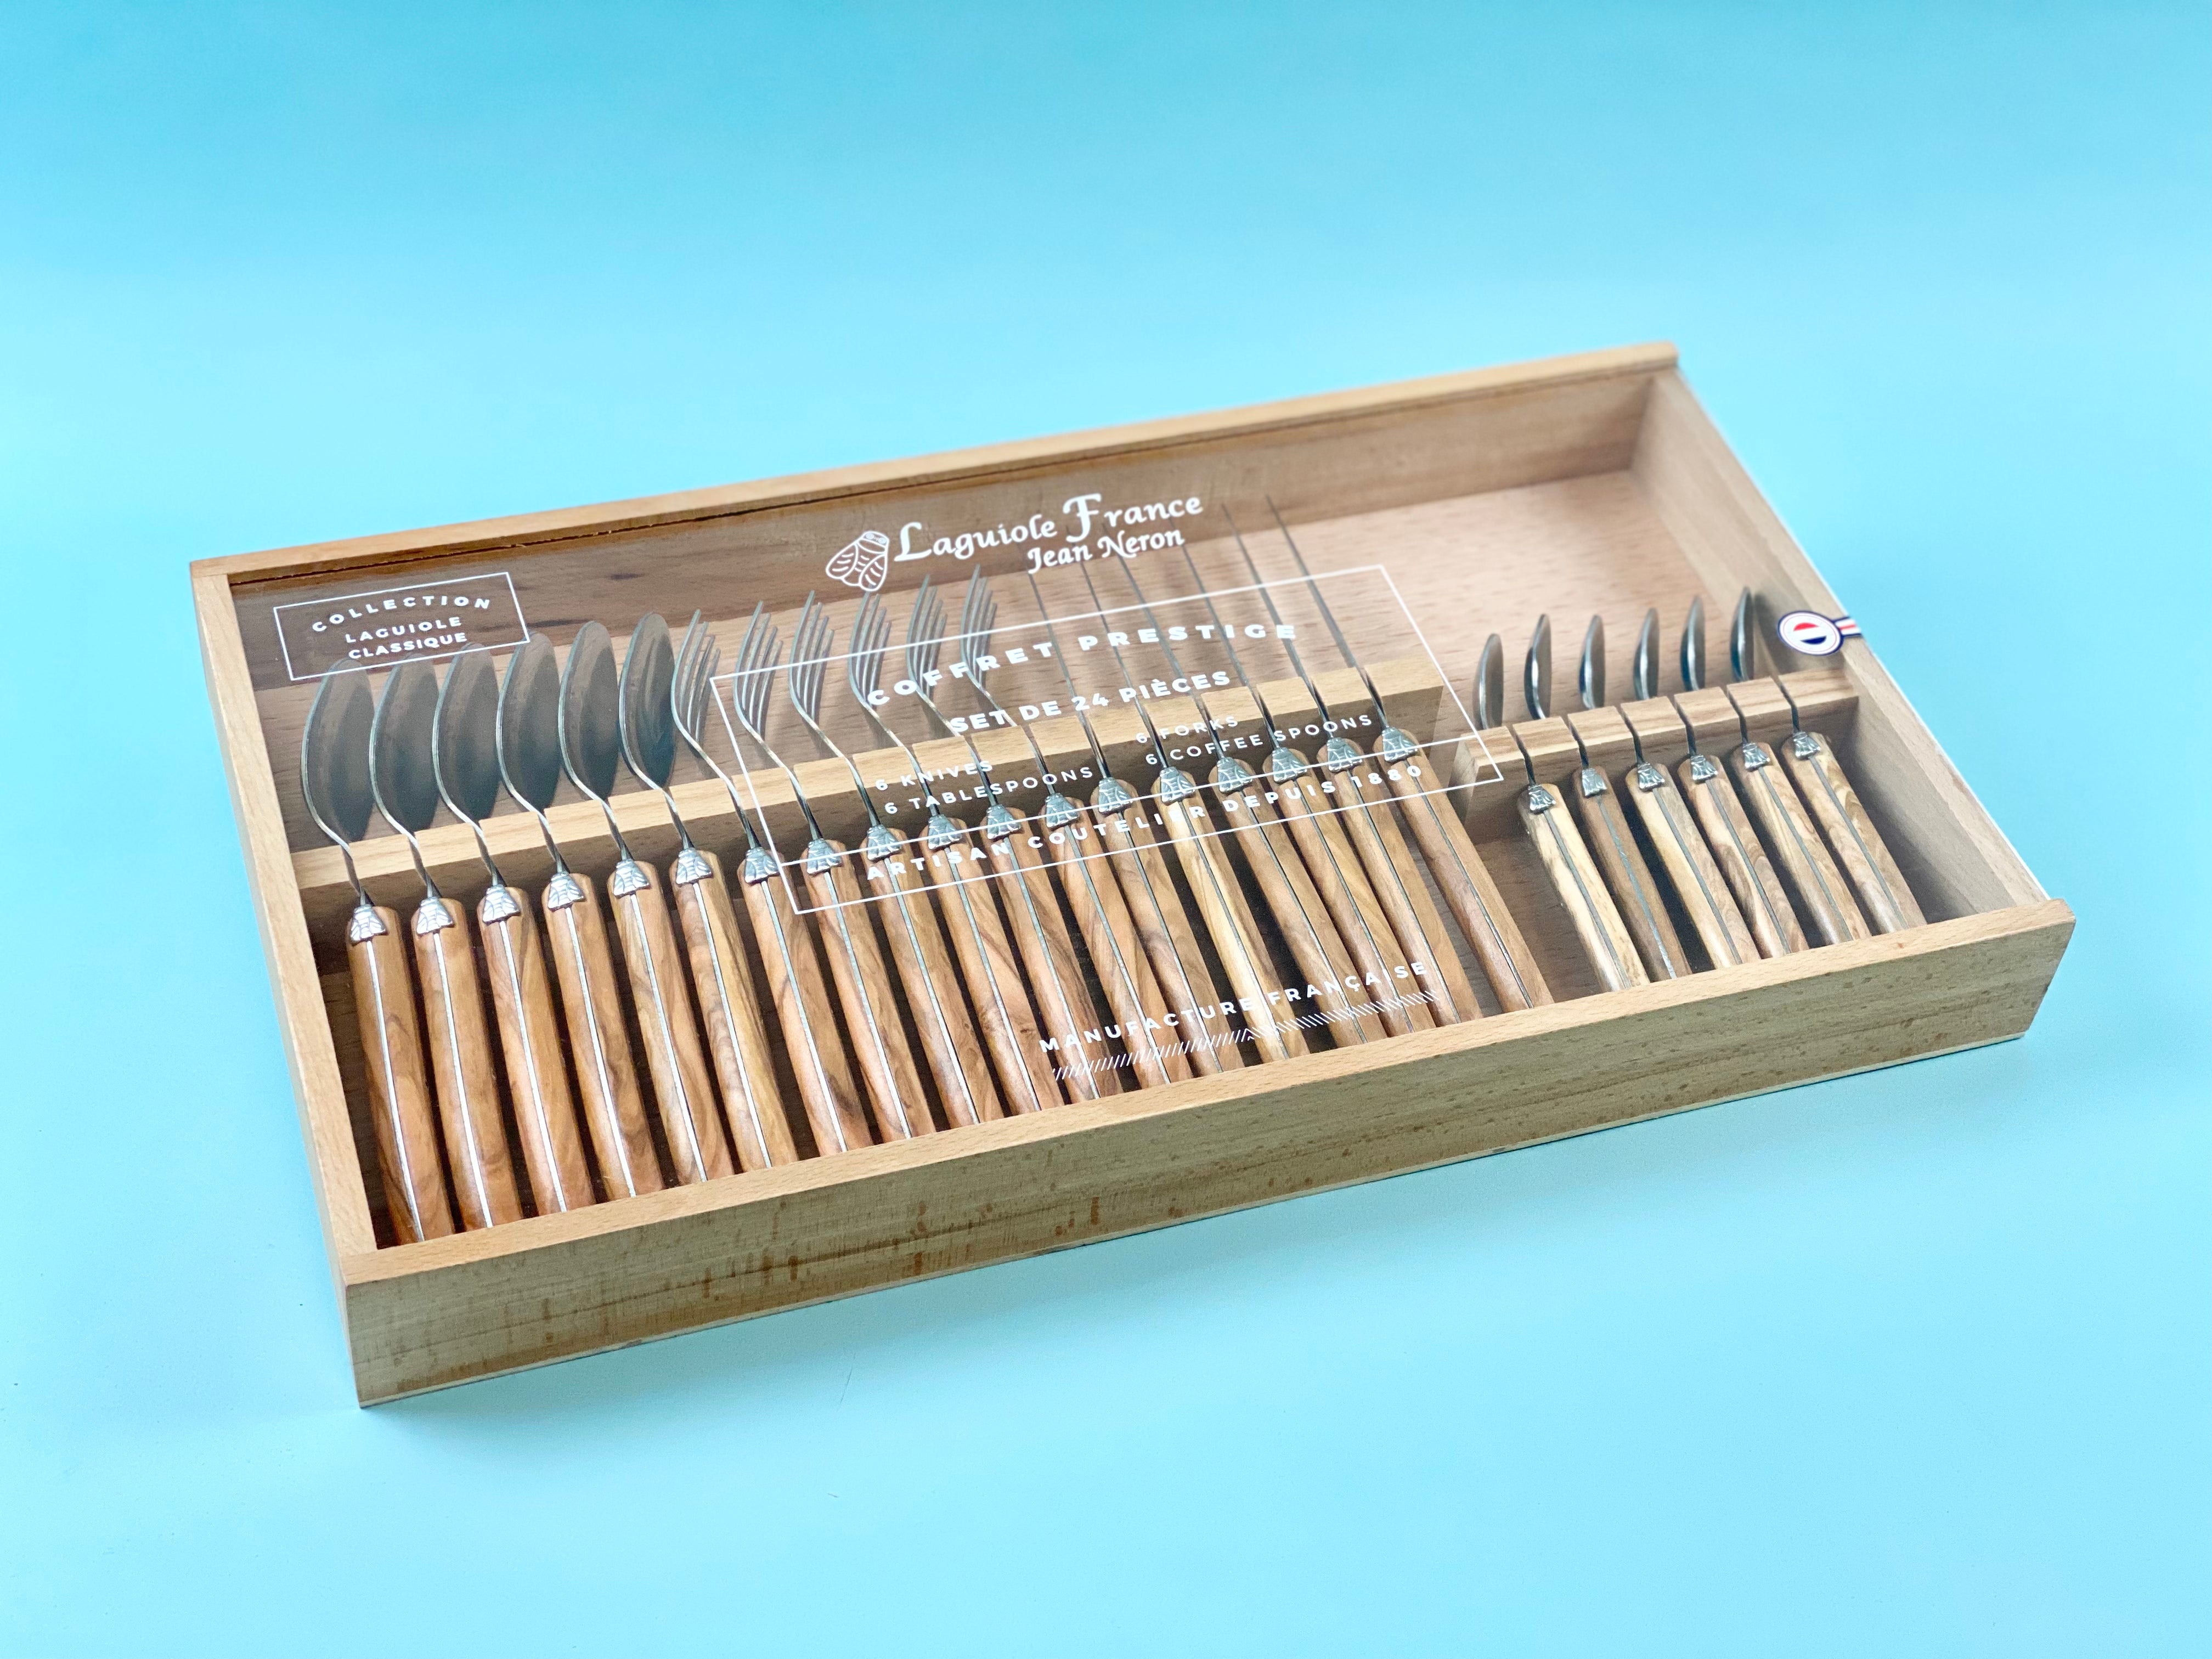 Laguiole Olivewood Flatware in Wooden Box with Acrylic Lid (Set of 24) Cutlery Set Laguiole Brand_Laguiole Carving Sets Kitchen_Dinnerware Laguiole 790054000WOLAL